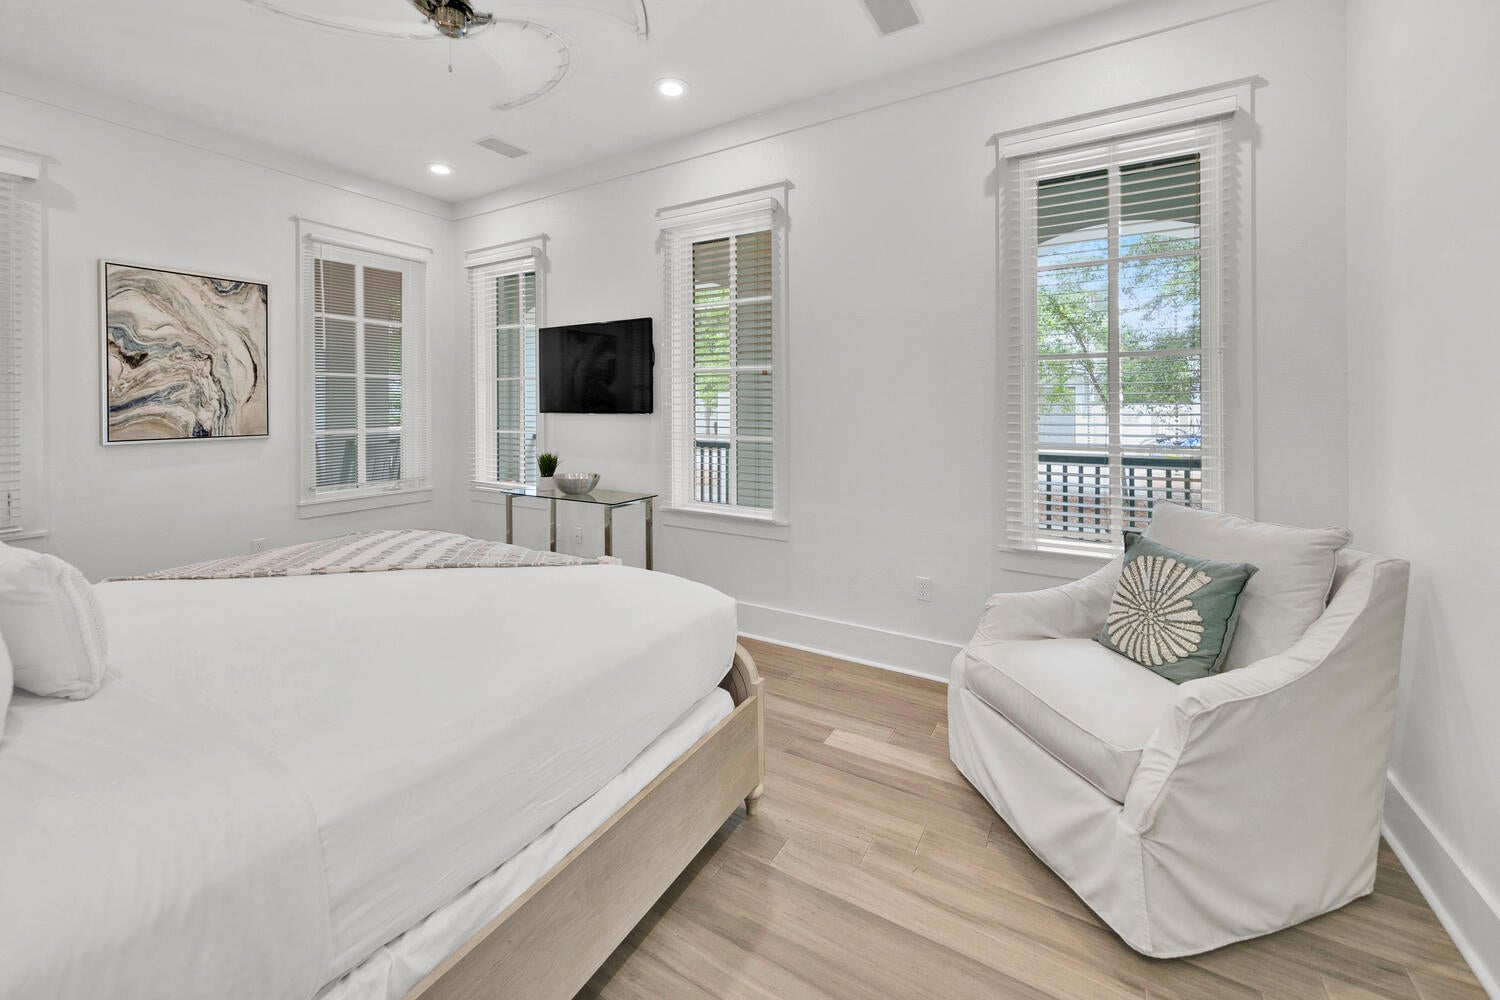 King Bed in spacious Master Bedroom